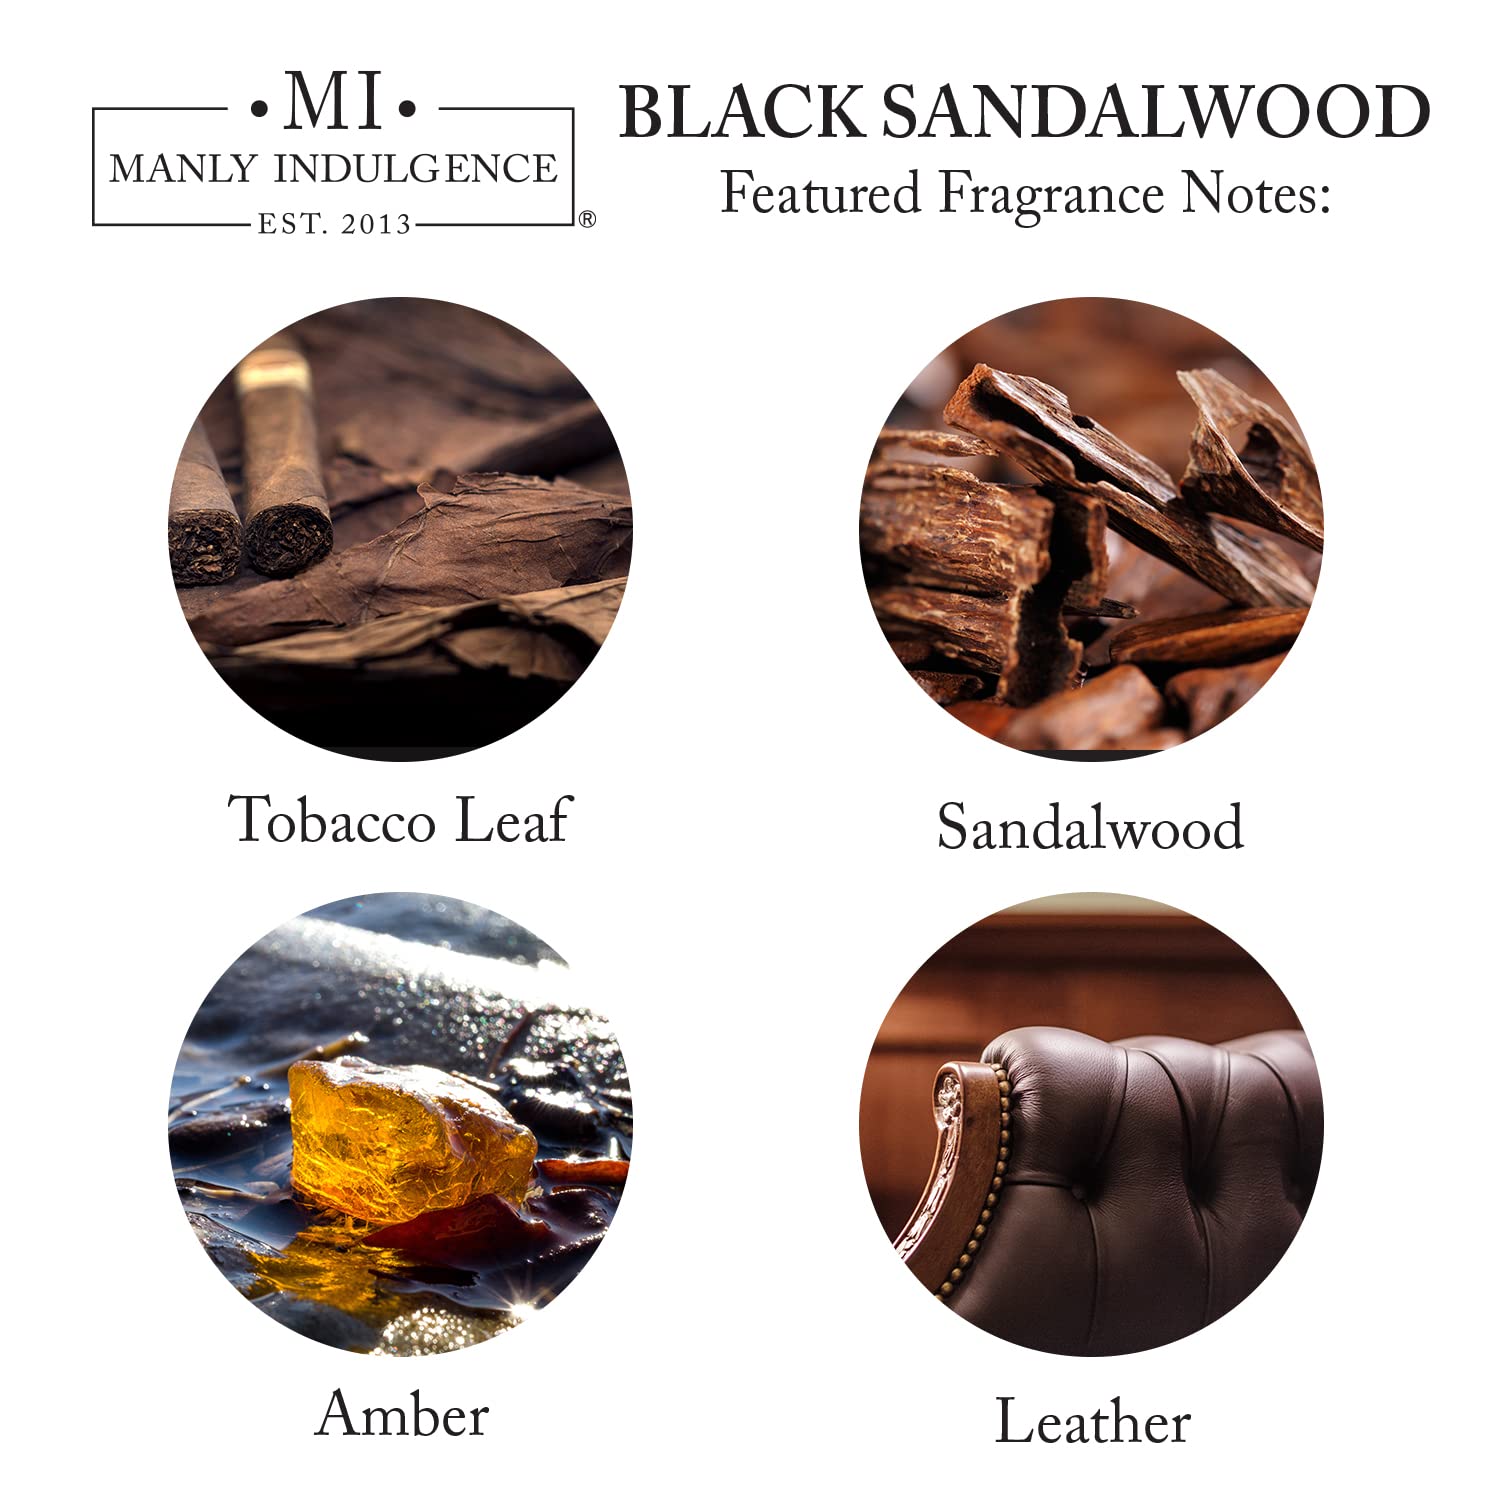 Manly Indulgence Scented Jar Candle, Black Sandalwood, Signature Collection, Soy Wax Blend, Wooden Wick, 15 Oz, Single (Bergamot, Tobacco, Amber & Musk)